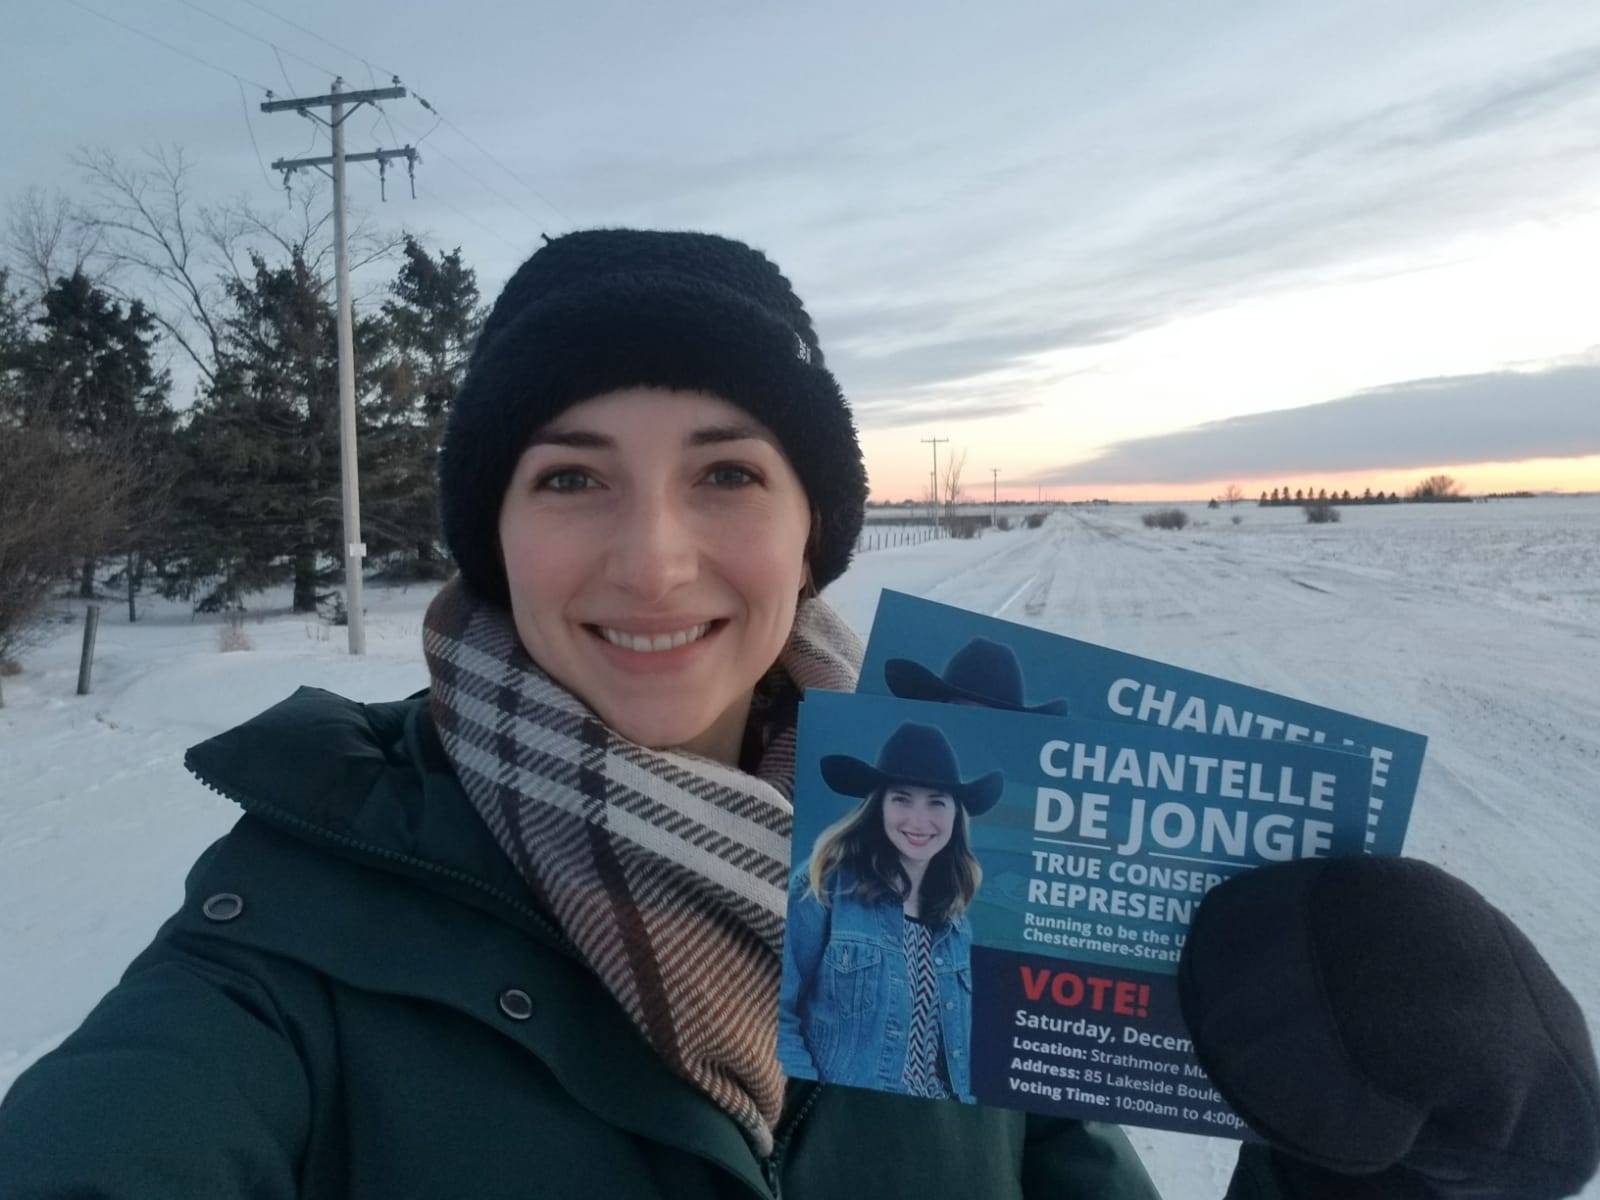 Chantelle de Jonge advocating for a strong and free Alberta - The